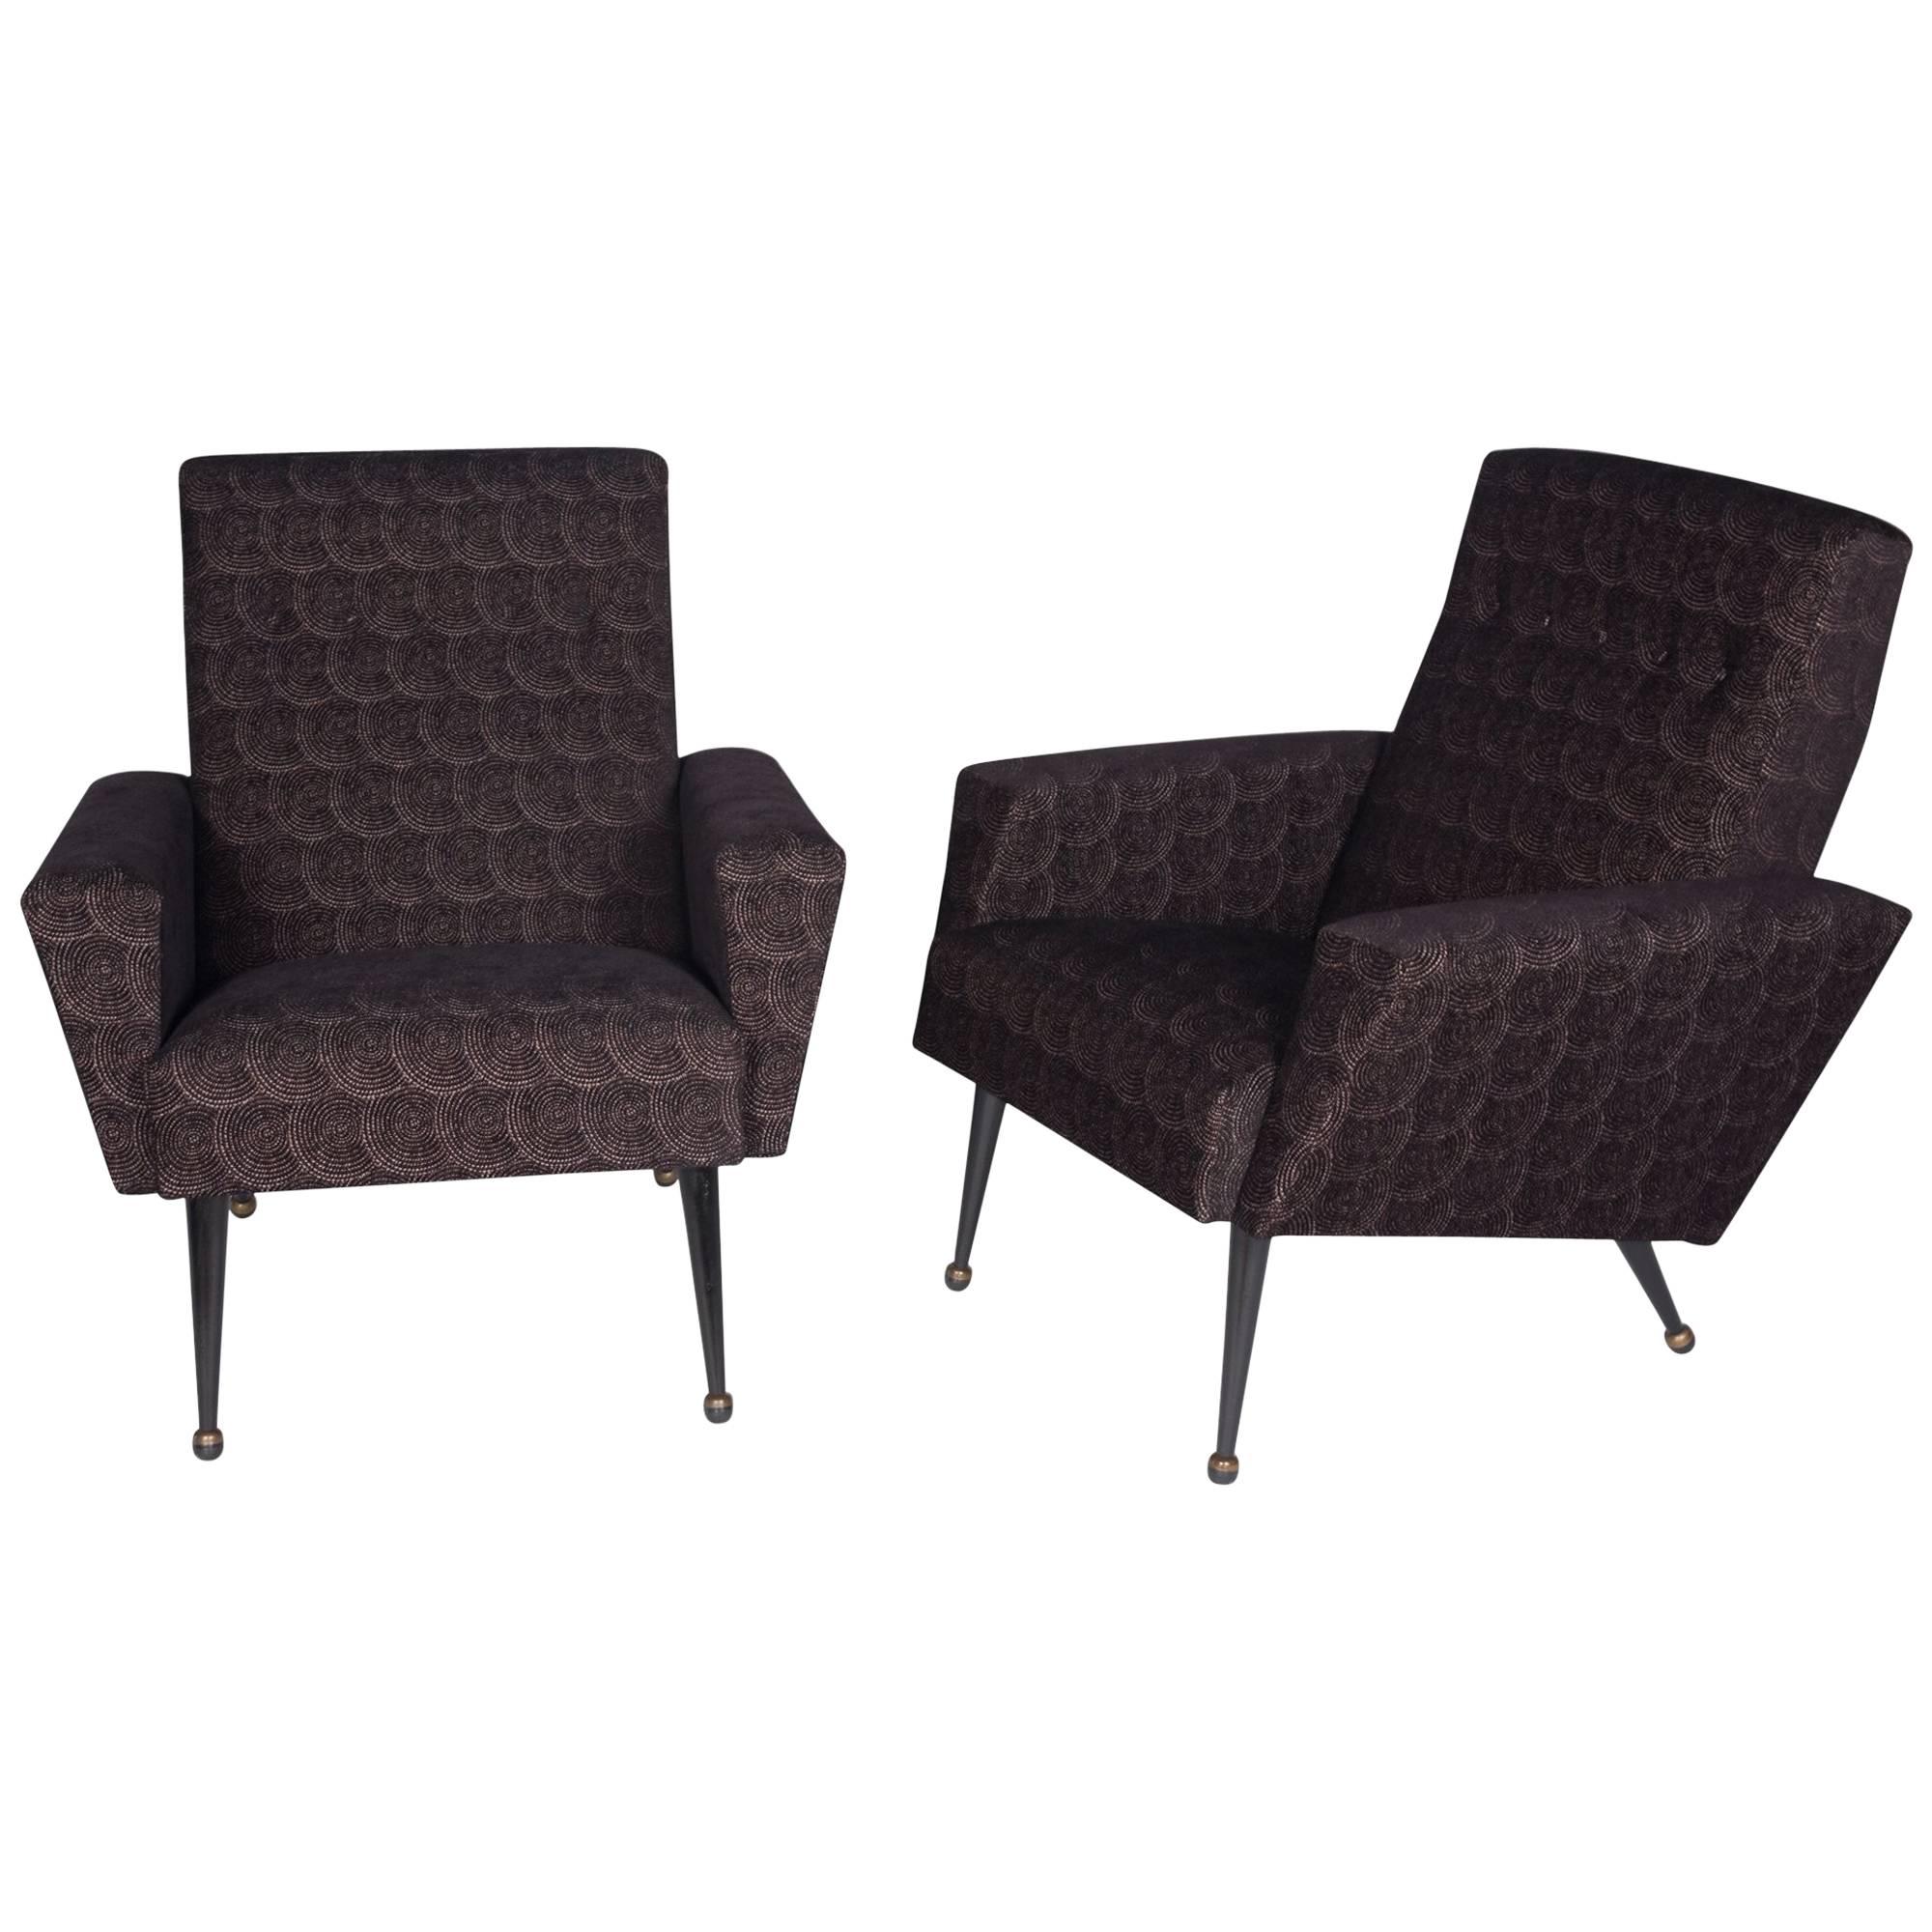 Pair of Airborne Upholstered Armchairs, French, 1960s For Sale